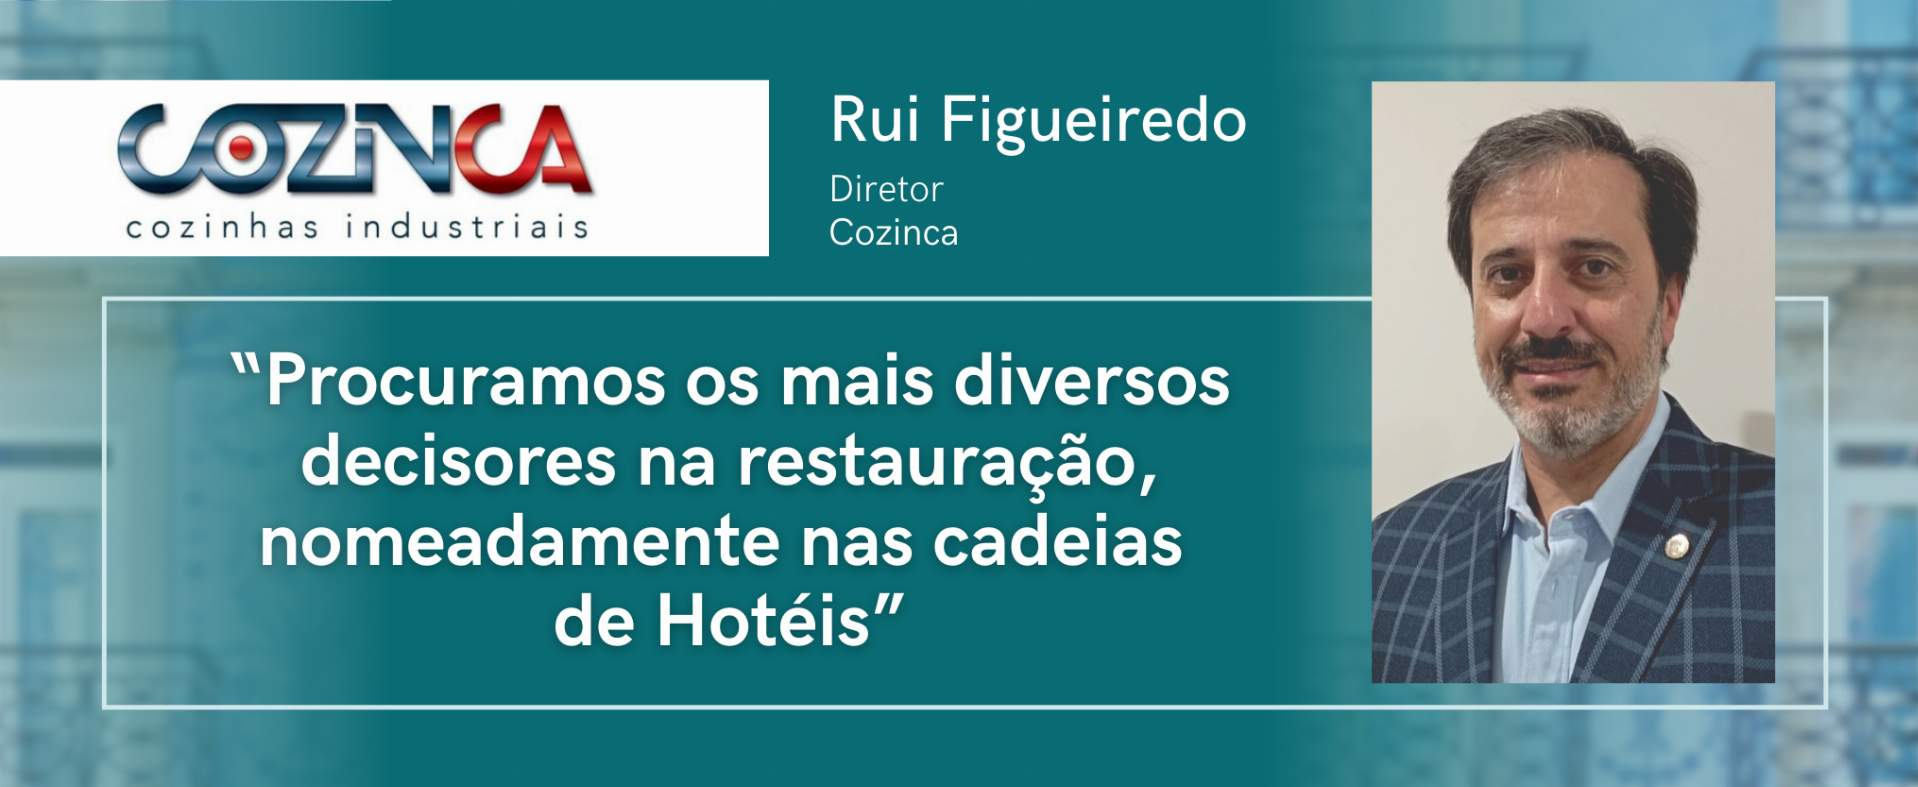 Cozinca: "We are looking for the most diverse decision makers in the restaurant business, namely in Hotel chains"